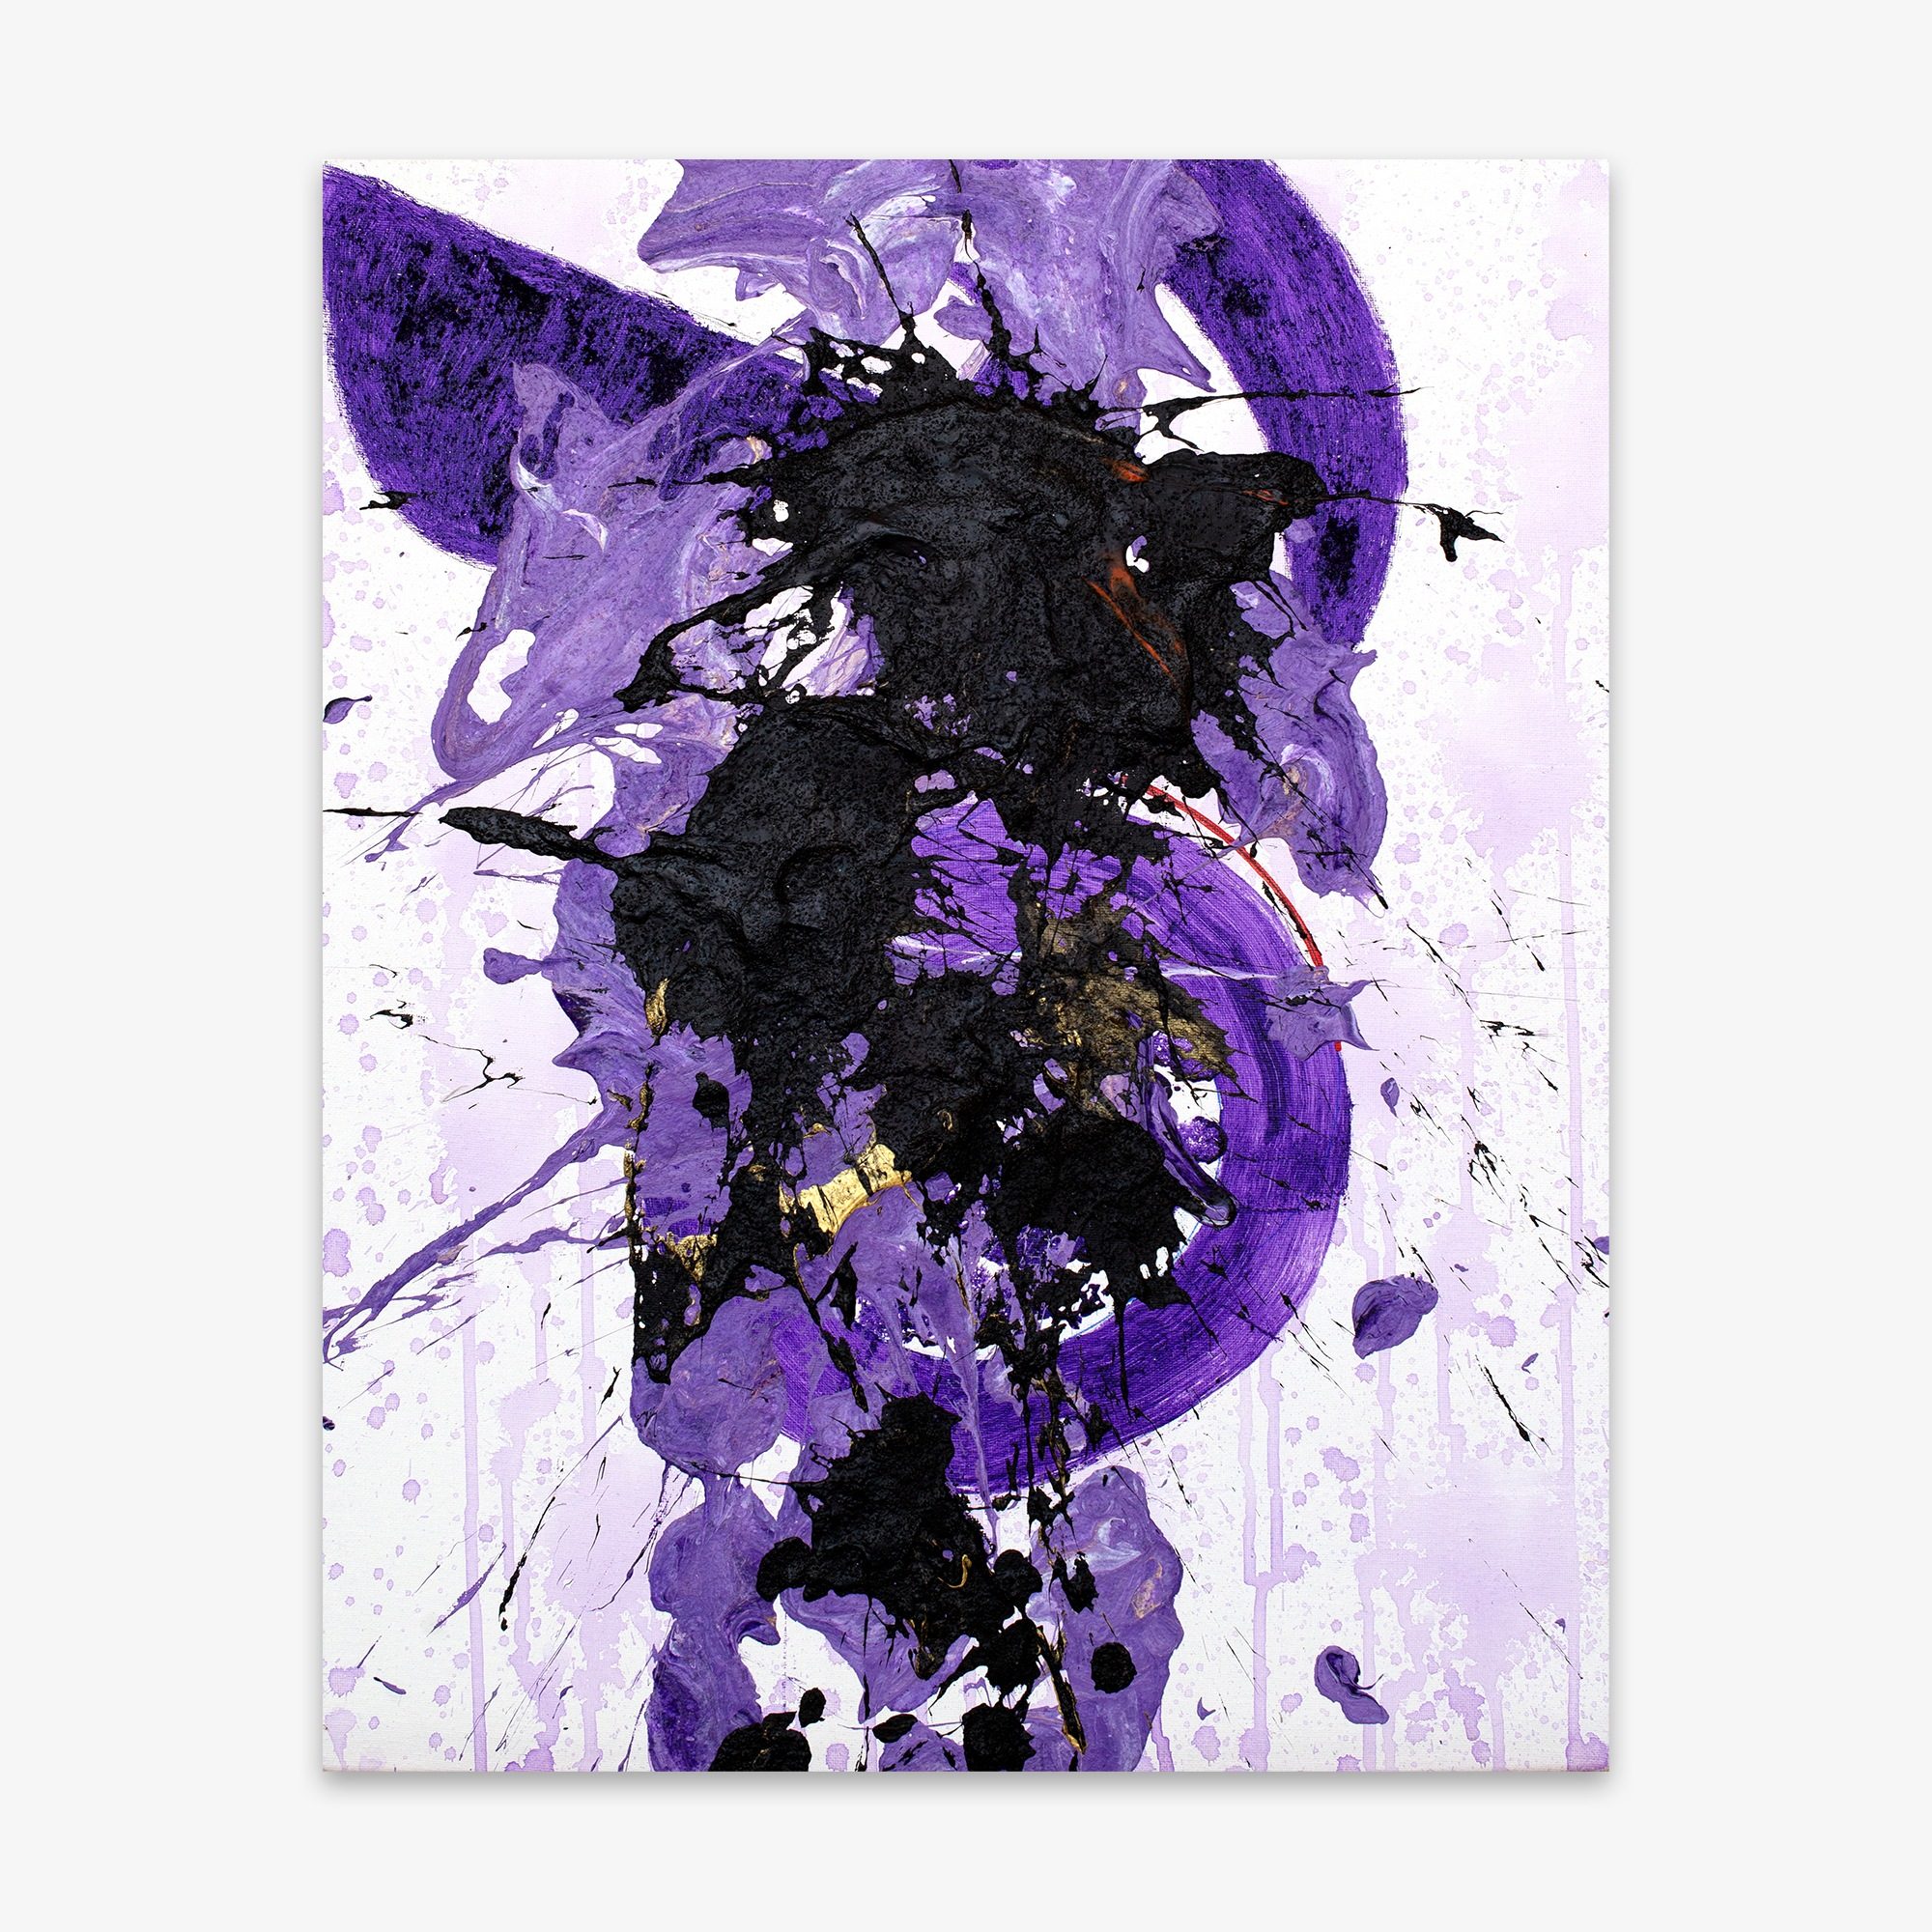 Abstract painting by artist Chester Cheesman titled "Purple Night" with bold purple and black shapes on a light background.